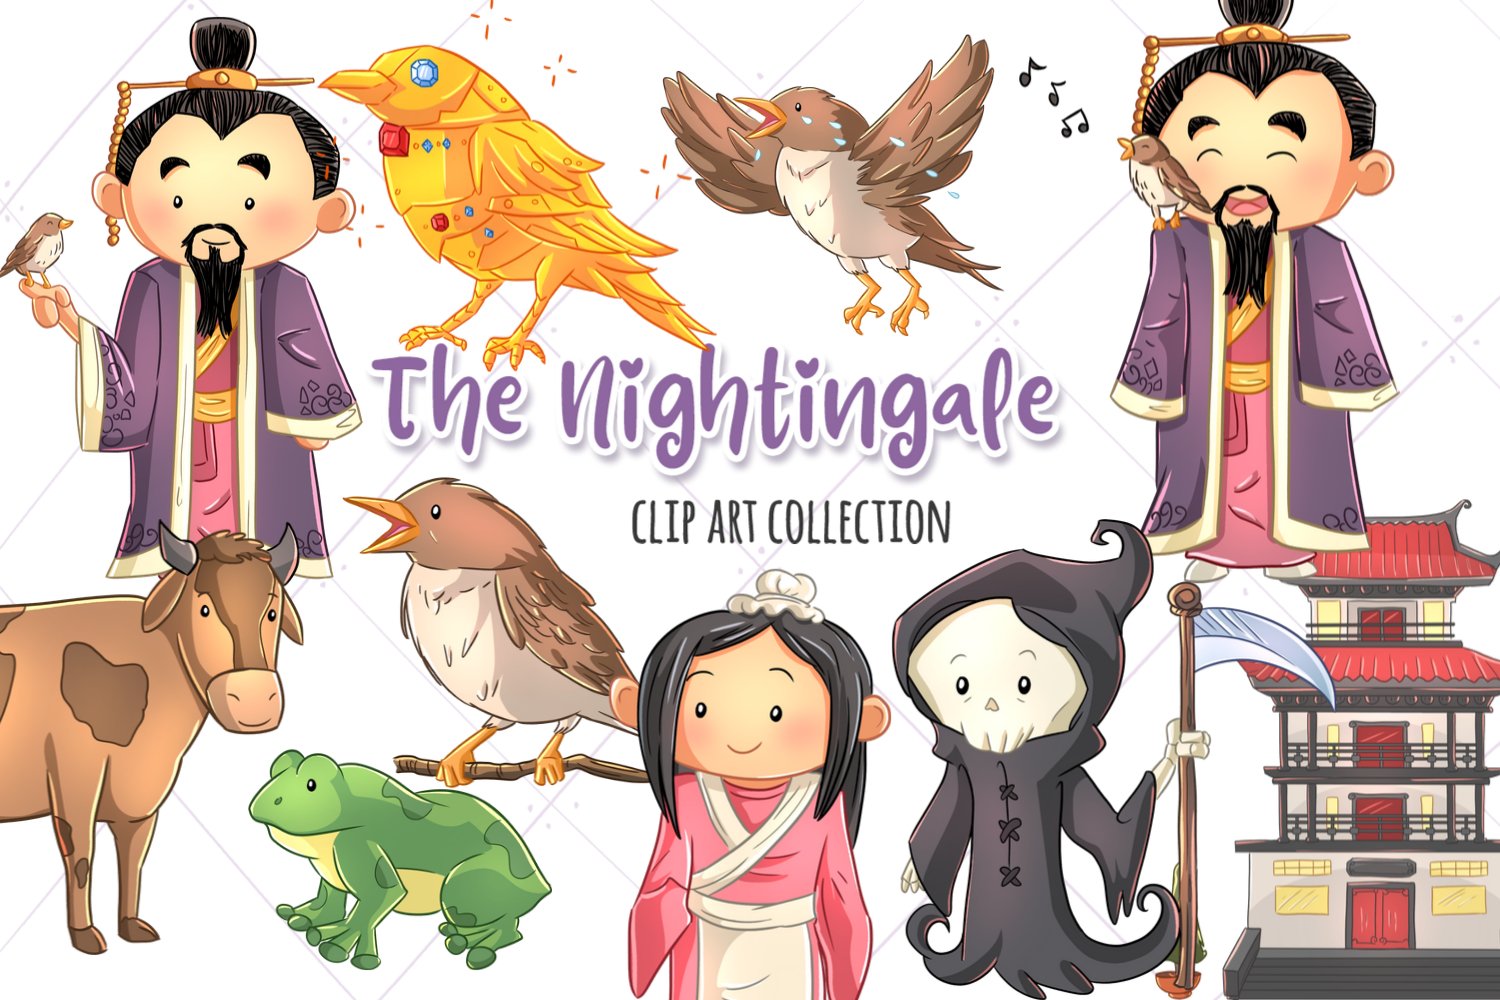 High quality Nightingale collection in an Asian style.